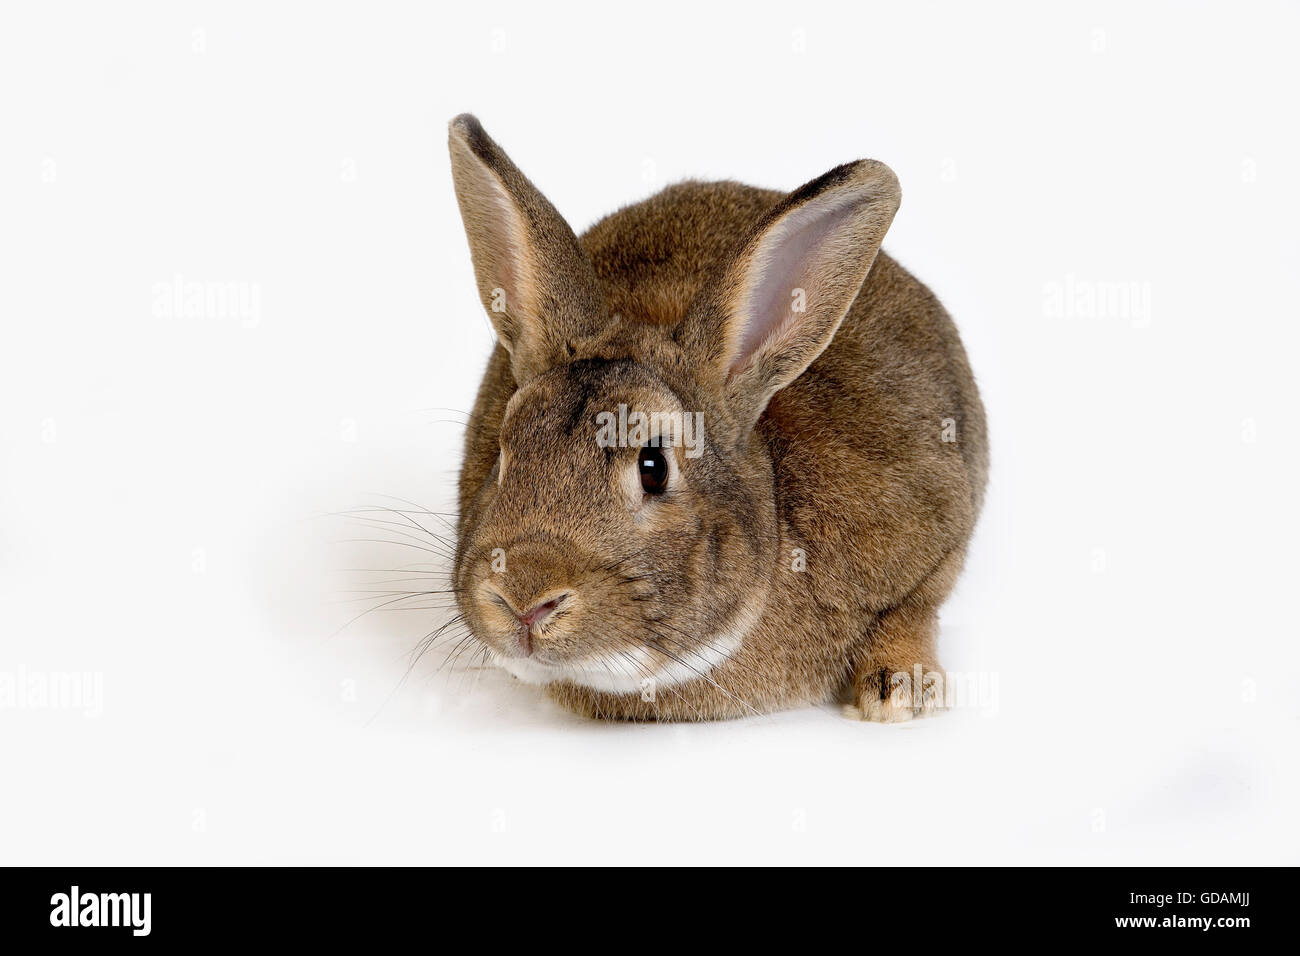 Normandy Domestic Rabbit, Adult against White Background Stock Photo